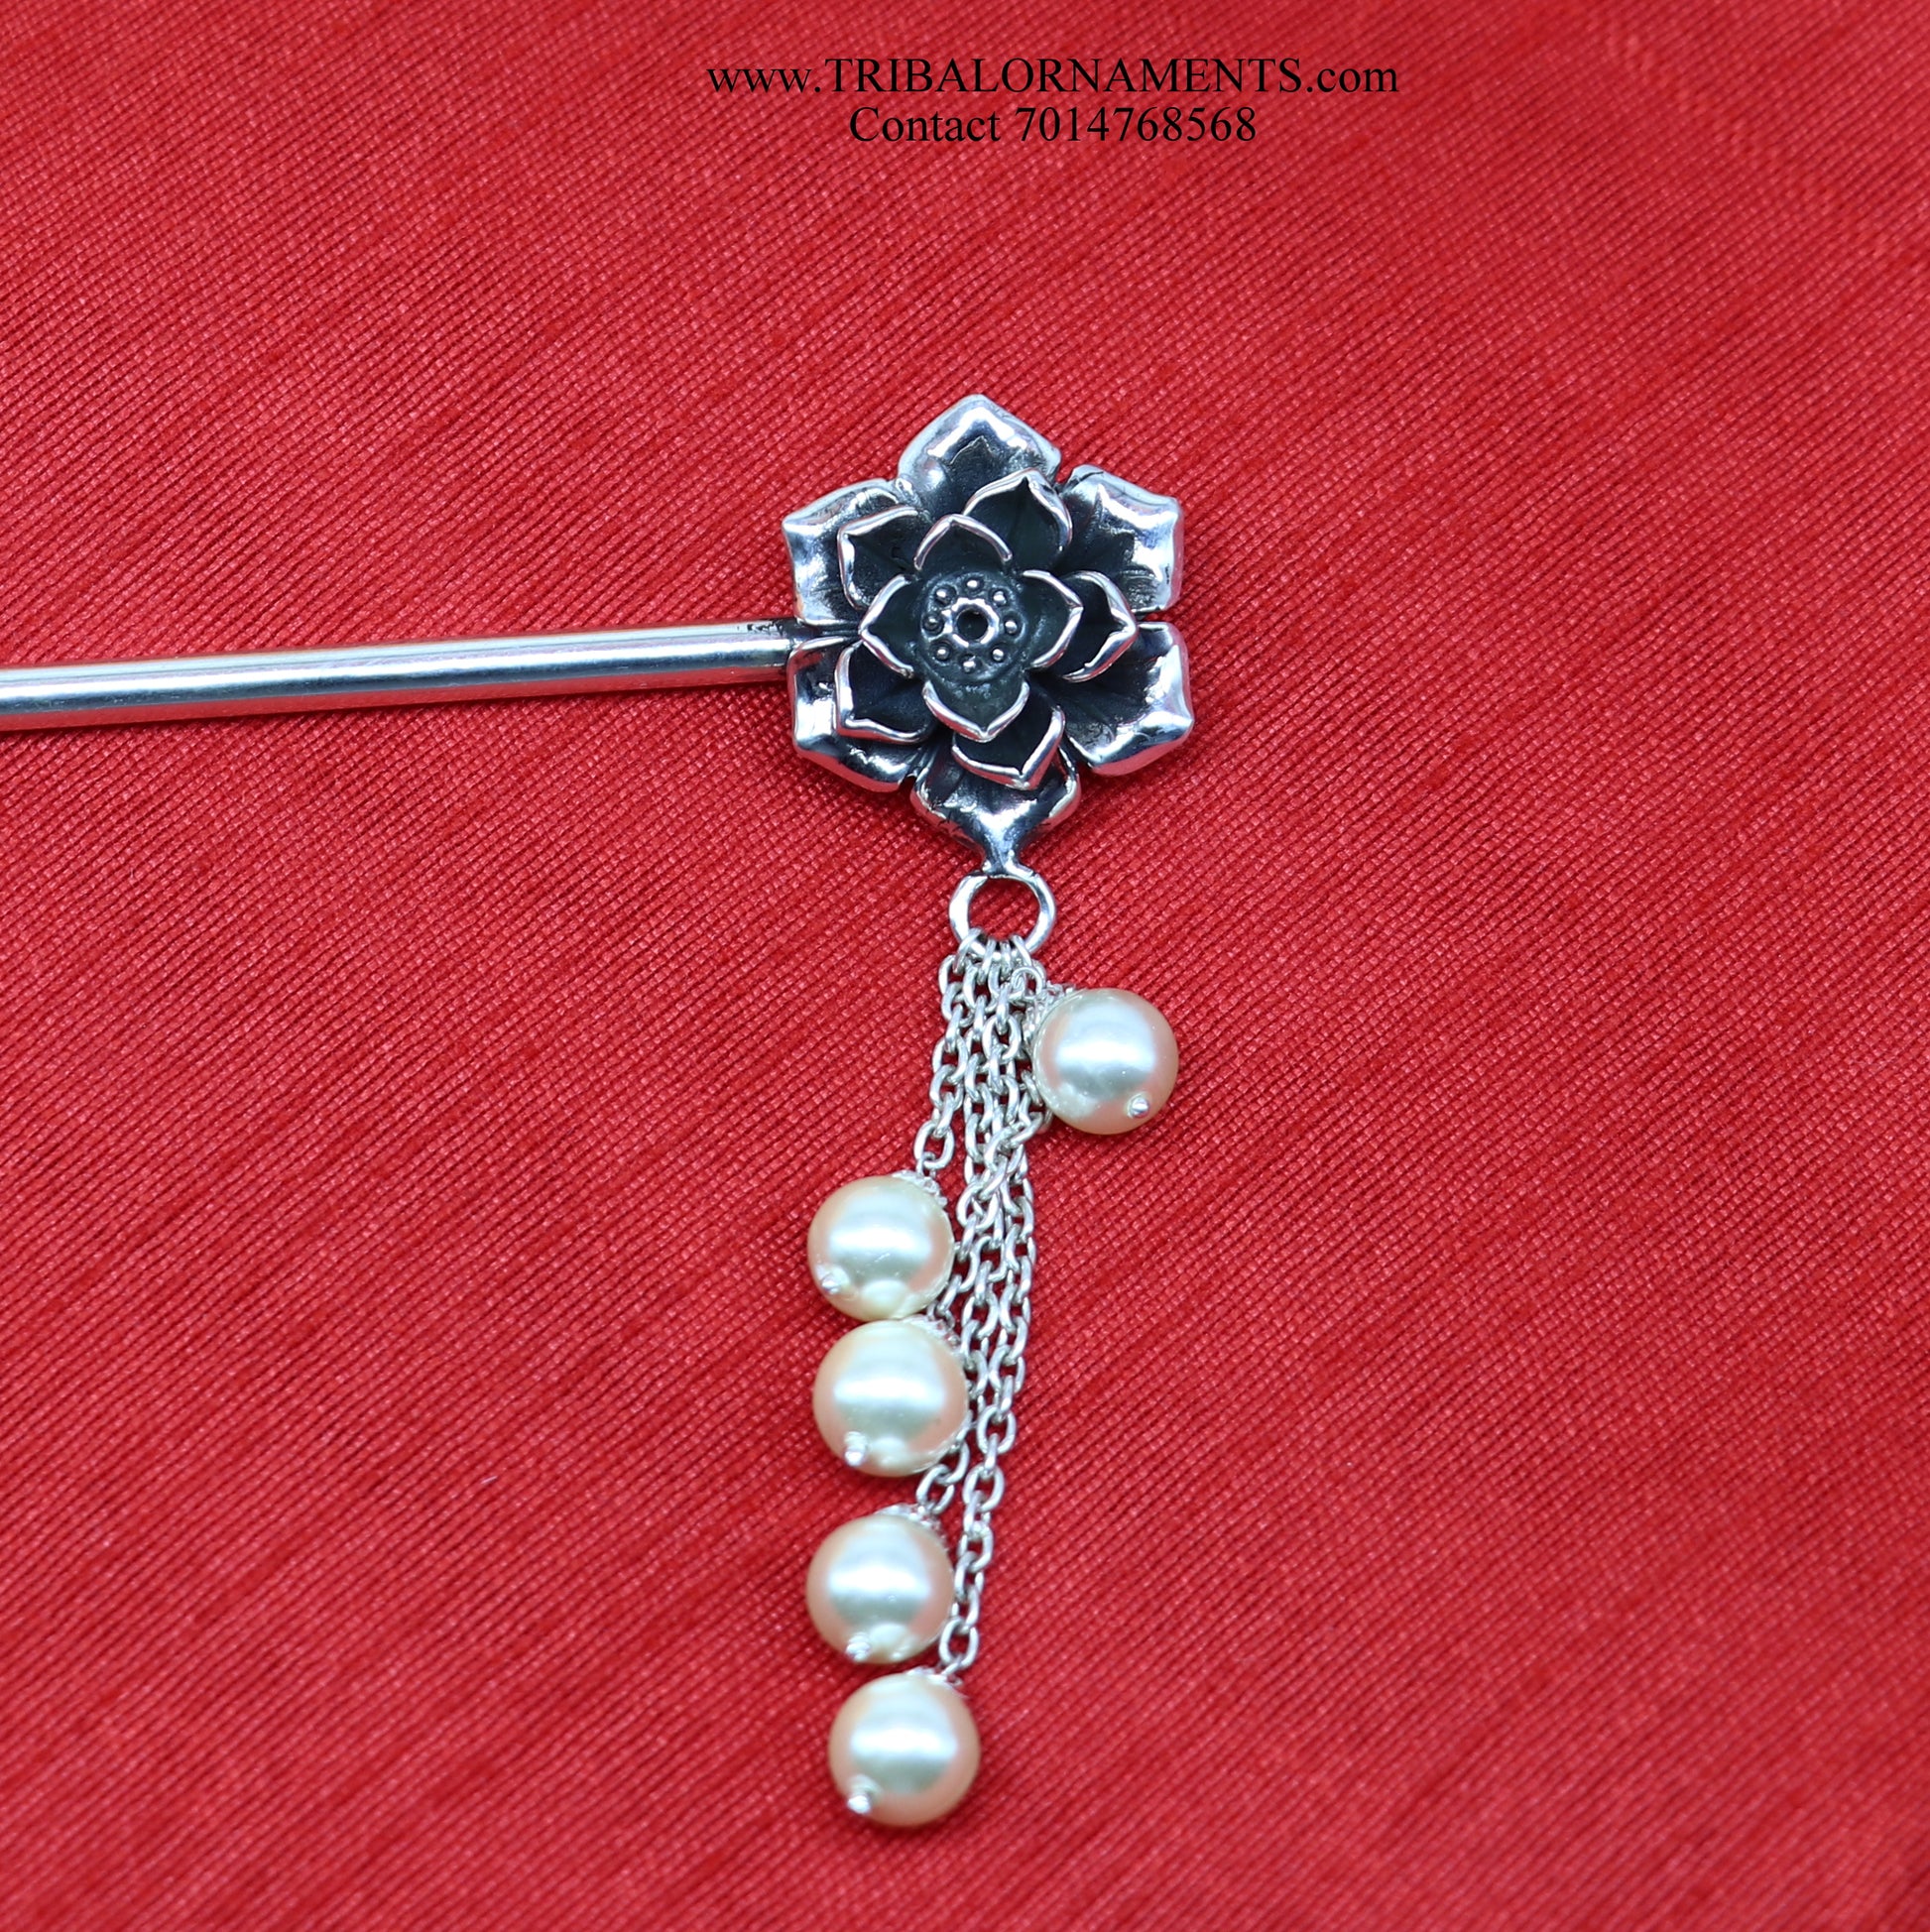 Sterling Silver Hairpin Juda Pin Floral pattern for Women 92.5 Pure and Certified HC07 - TRIBAL ORNAMENTS